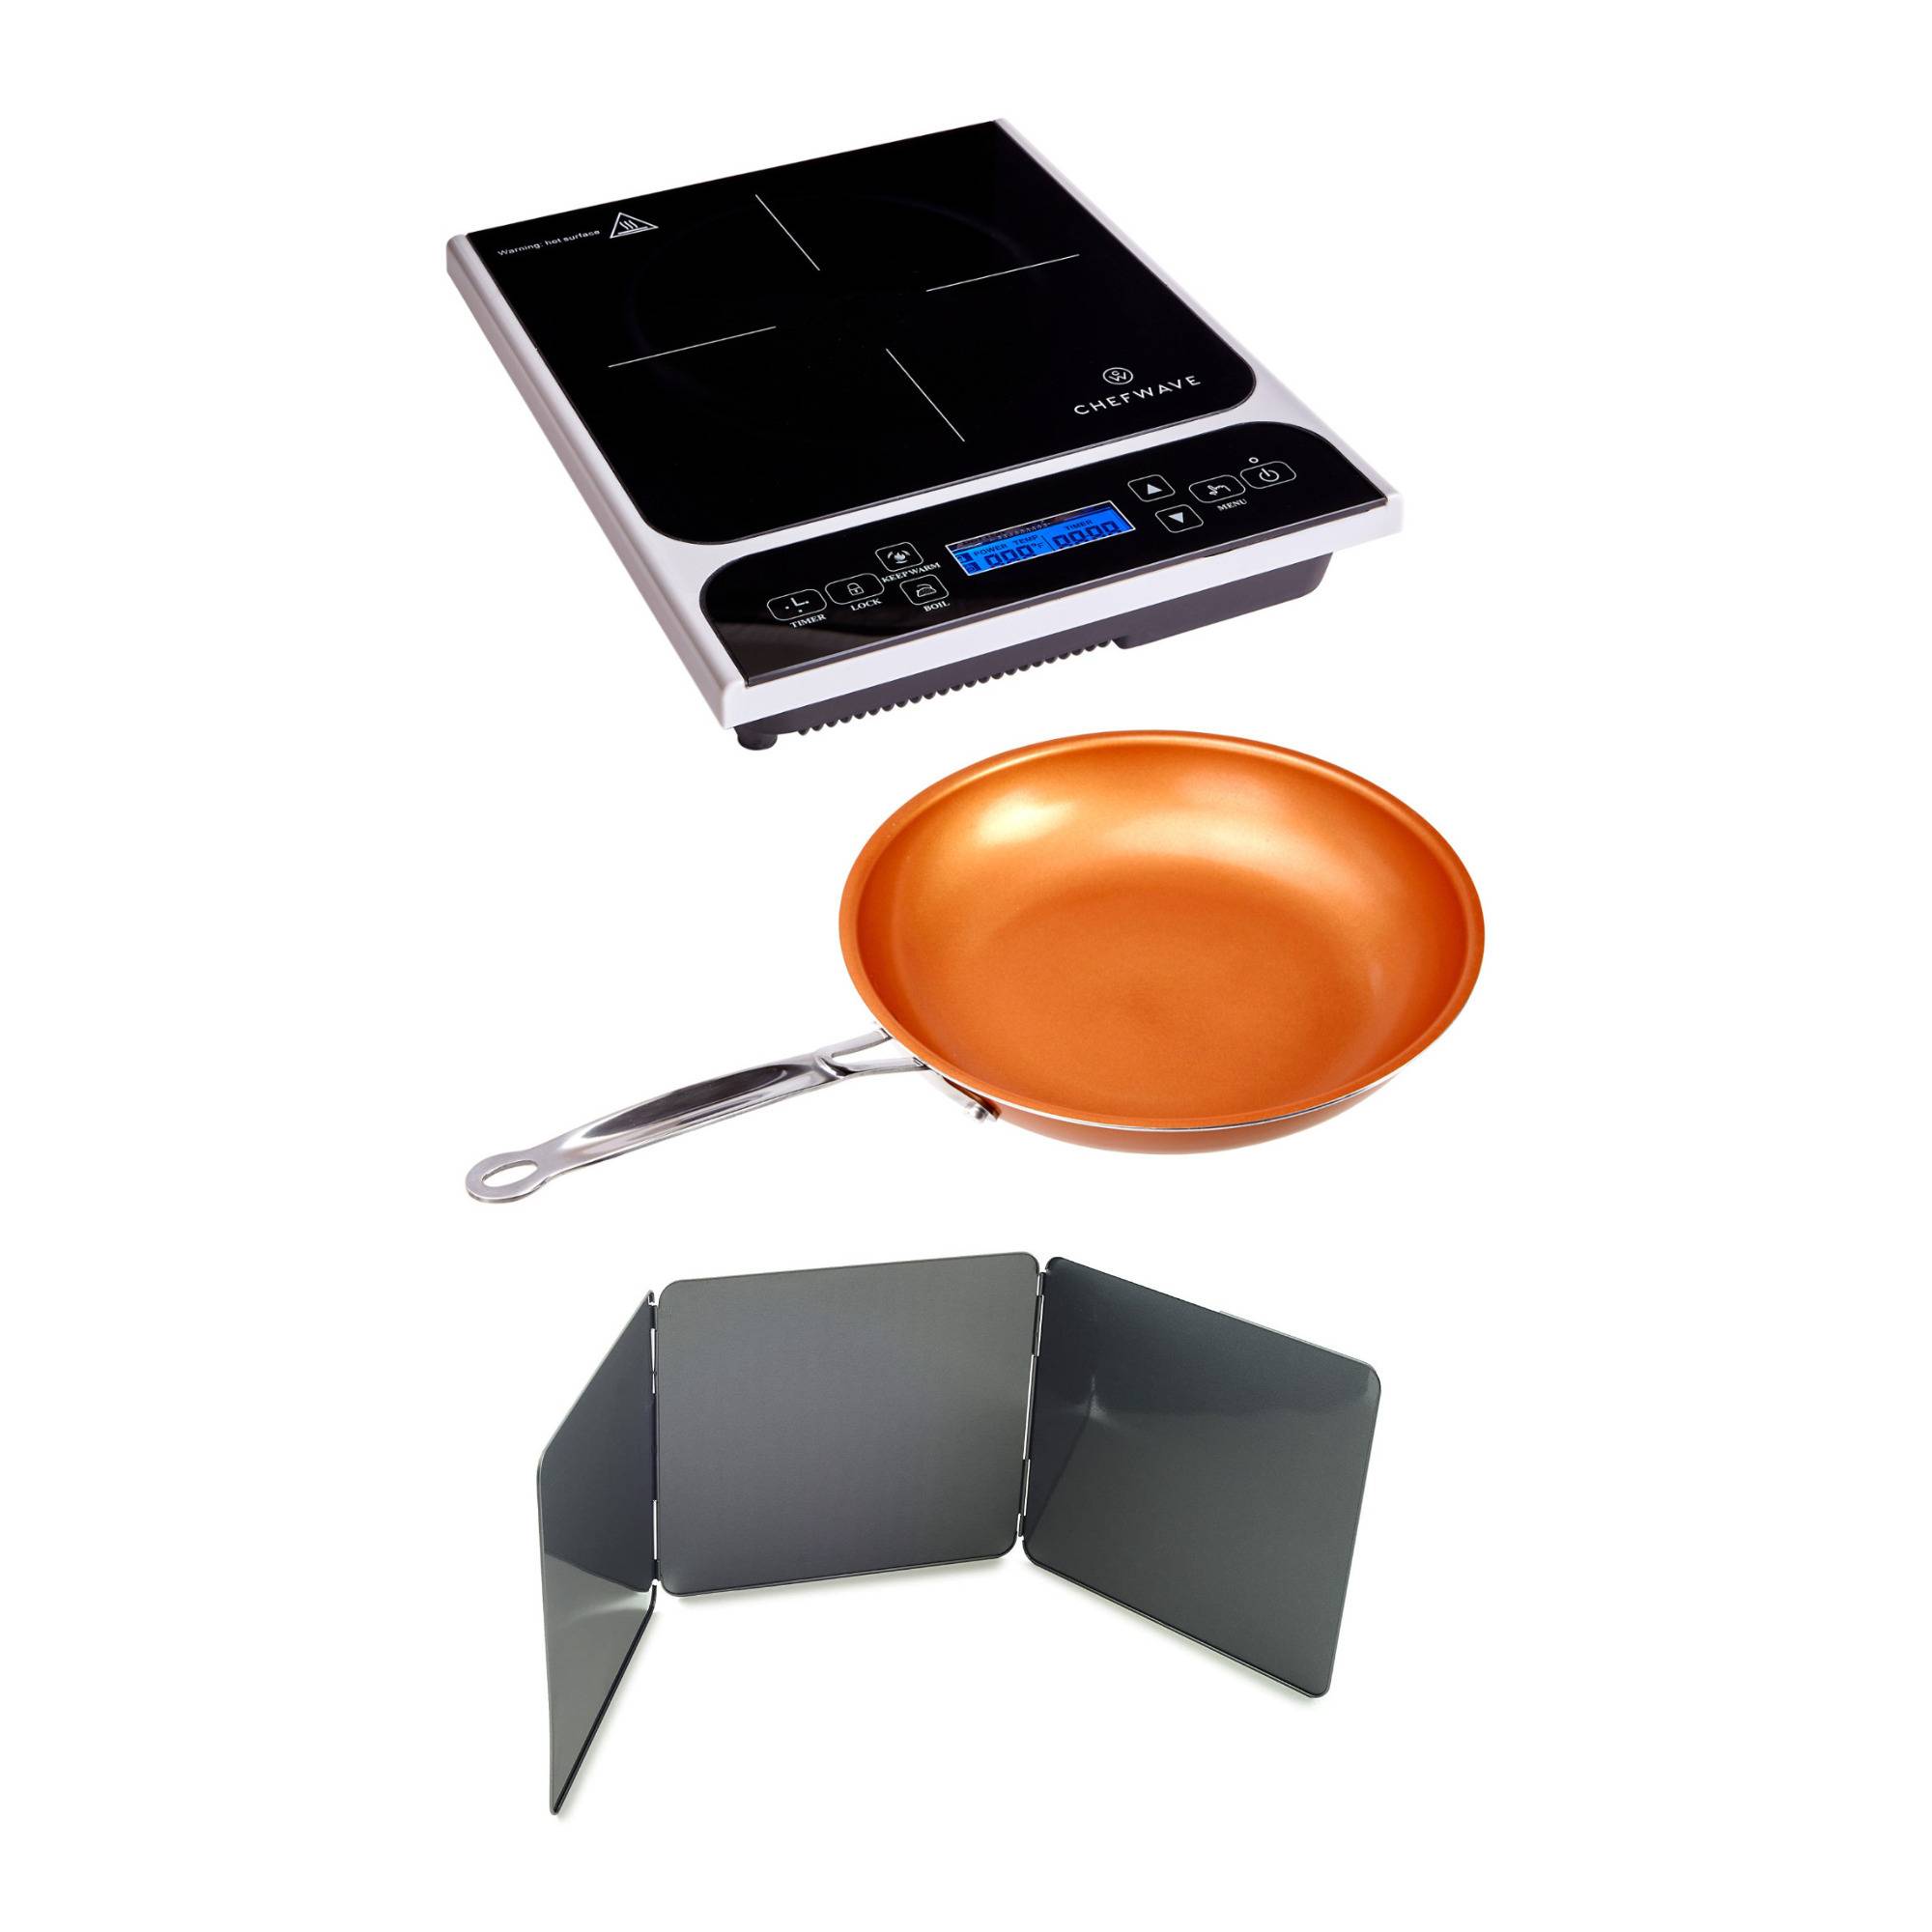 ChefWave LCD 1800W Portable Induction Cooktop with Frying Pan and Non-Stick Splatter Guard